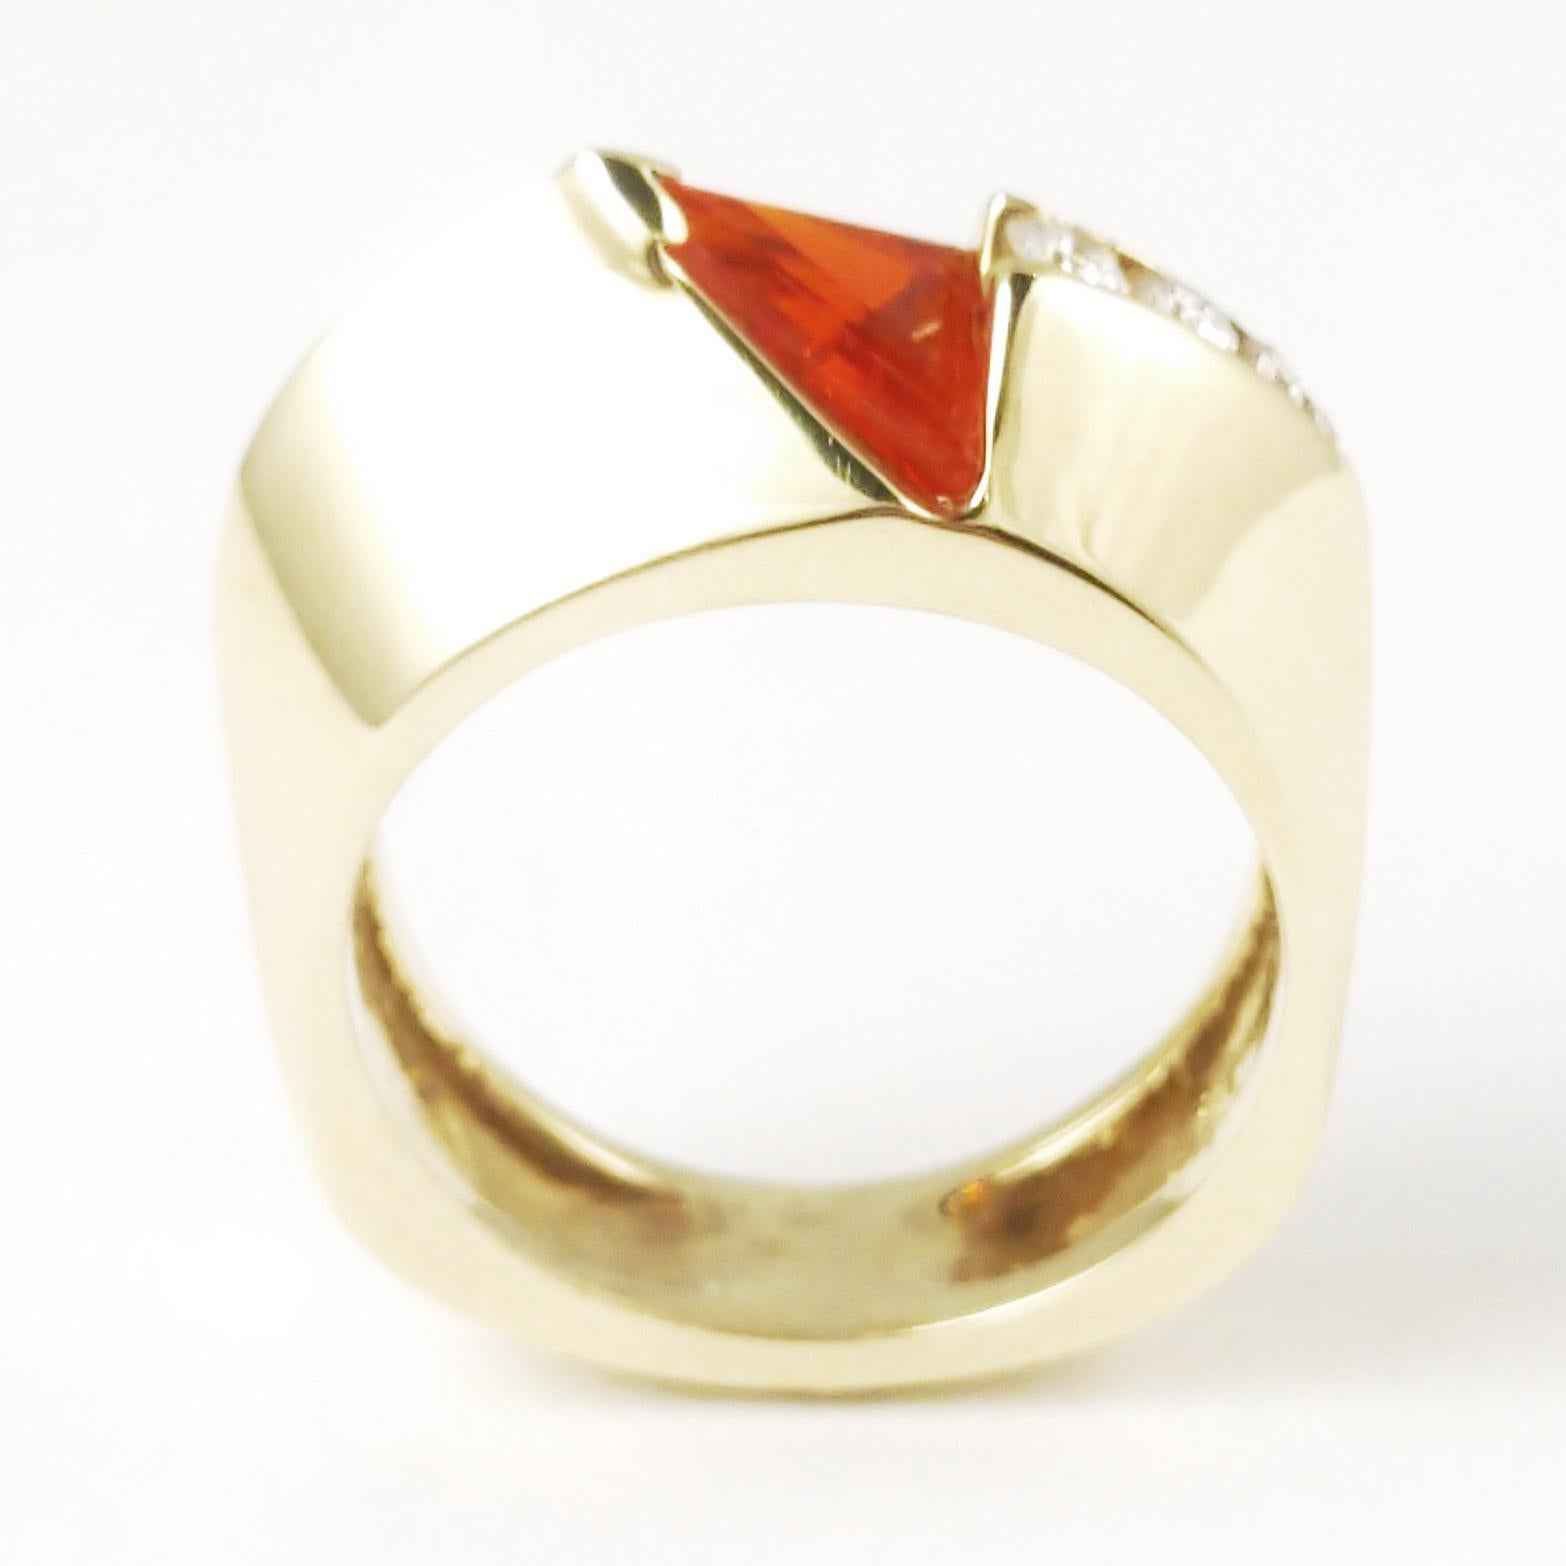 This Cornelis Hollander ring is featuring our favorite shape - the triangle. It features strait edge trillion cut fire opal channel set on an upward angle. The diamond weight is .11 ct. G VS2 quality. The finger size is currently a 5.5 but can be